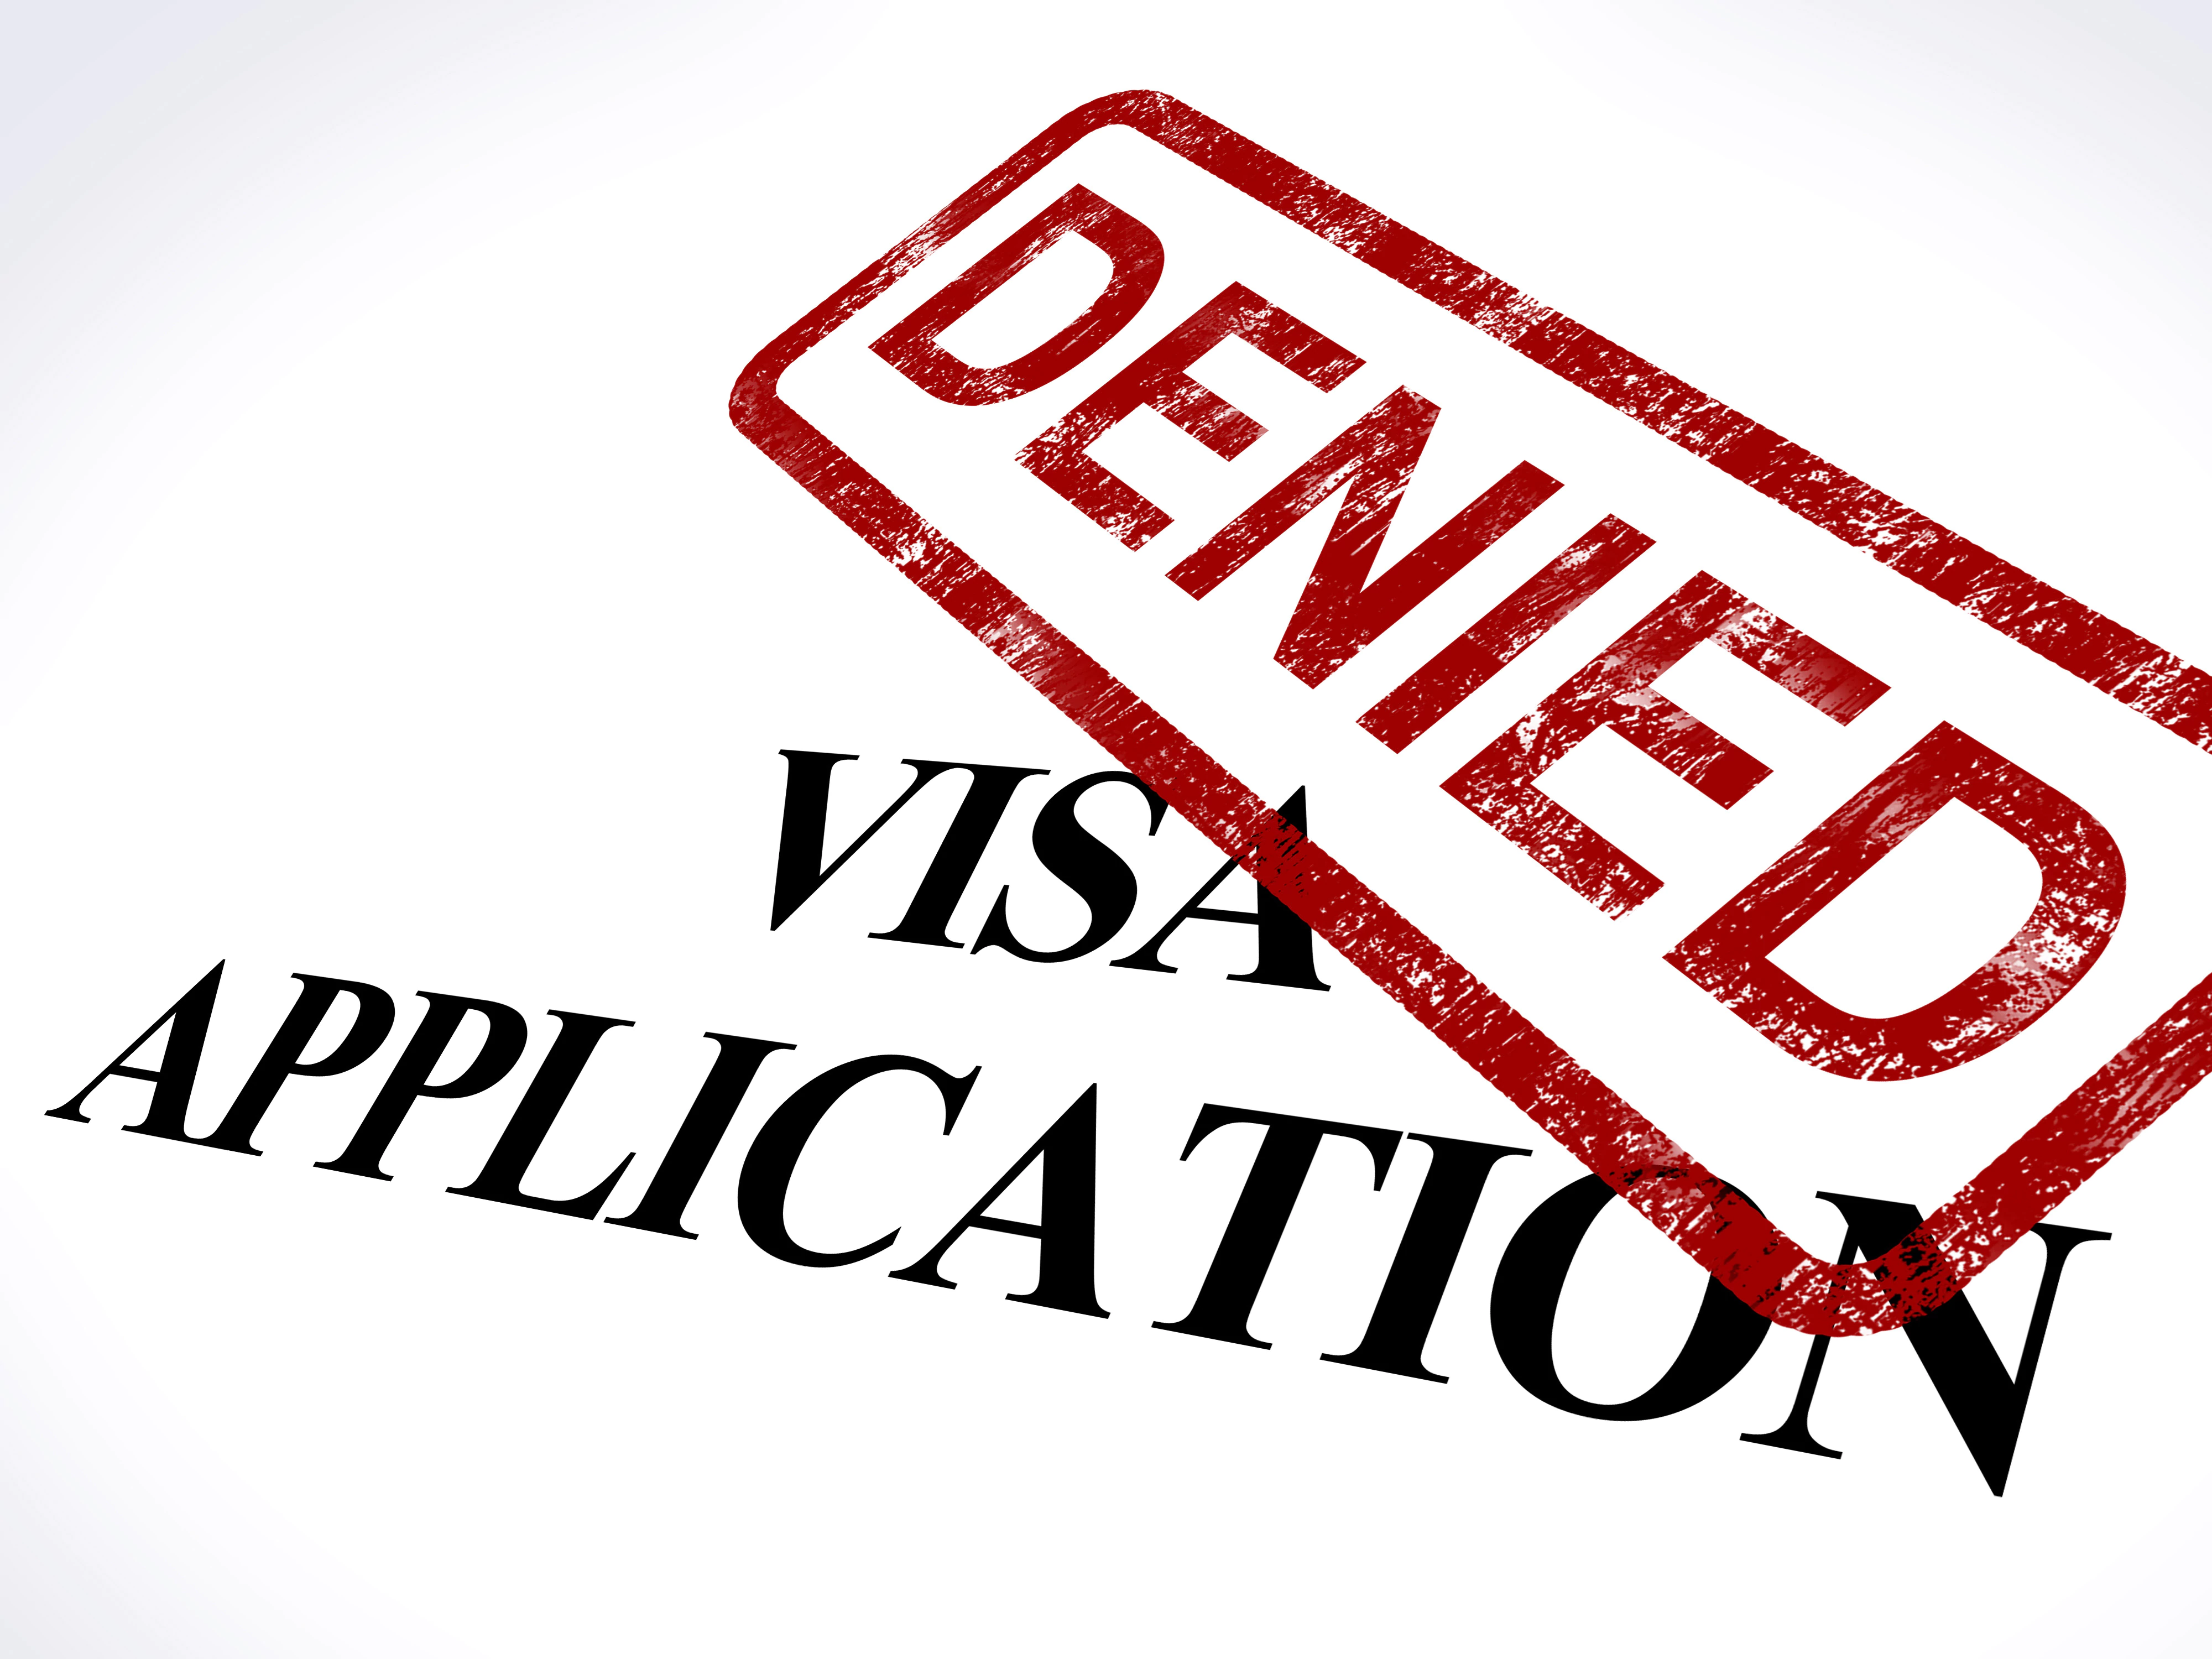 Denied visa application as per the excessive demand policy for disabled people.